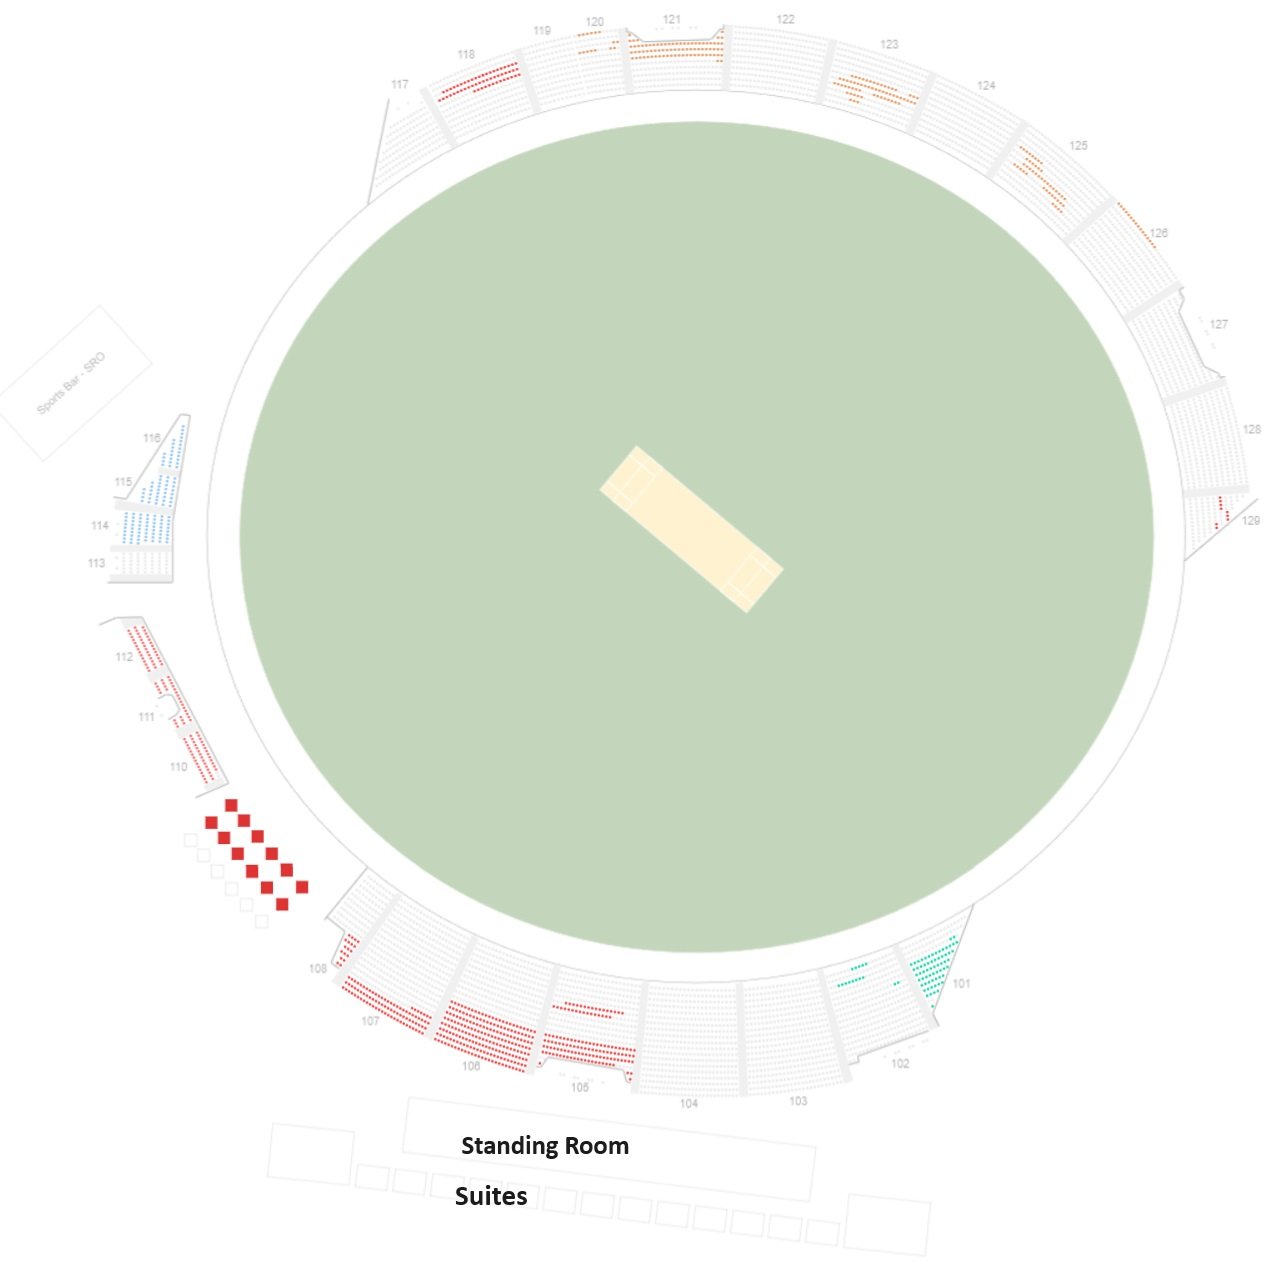 Grand Prairie Stadium Texas Seating Chart with Seat Numbers and Stands